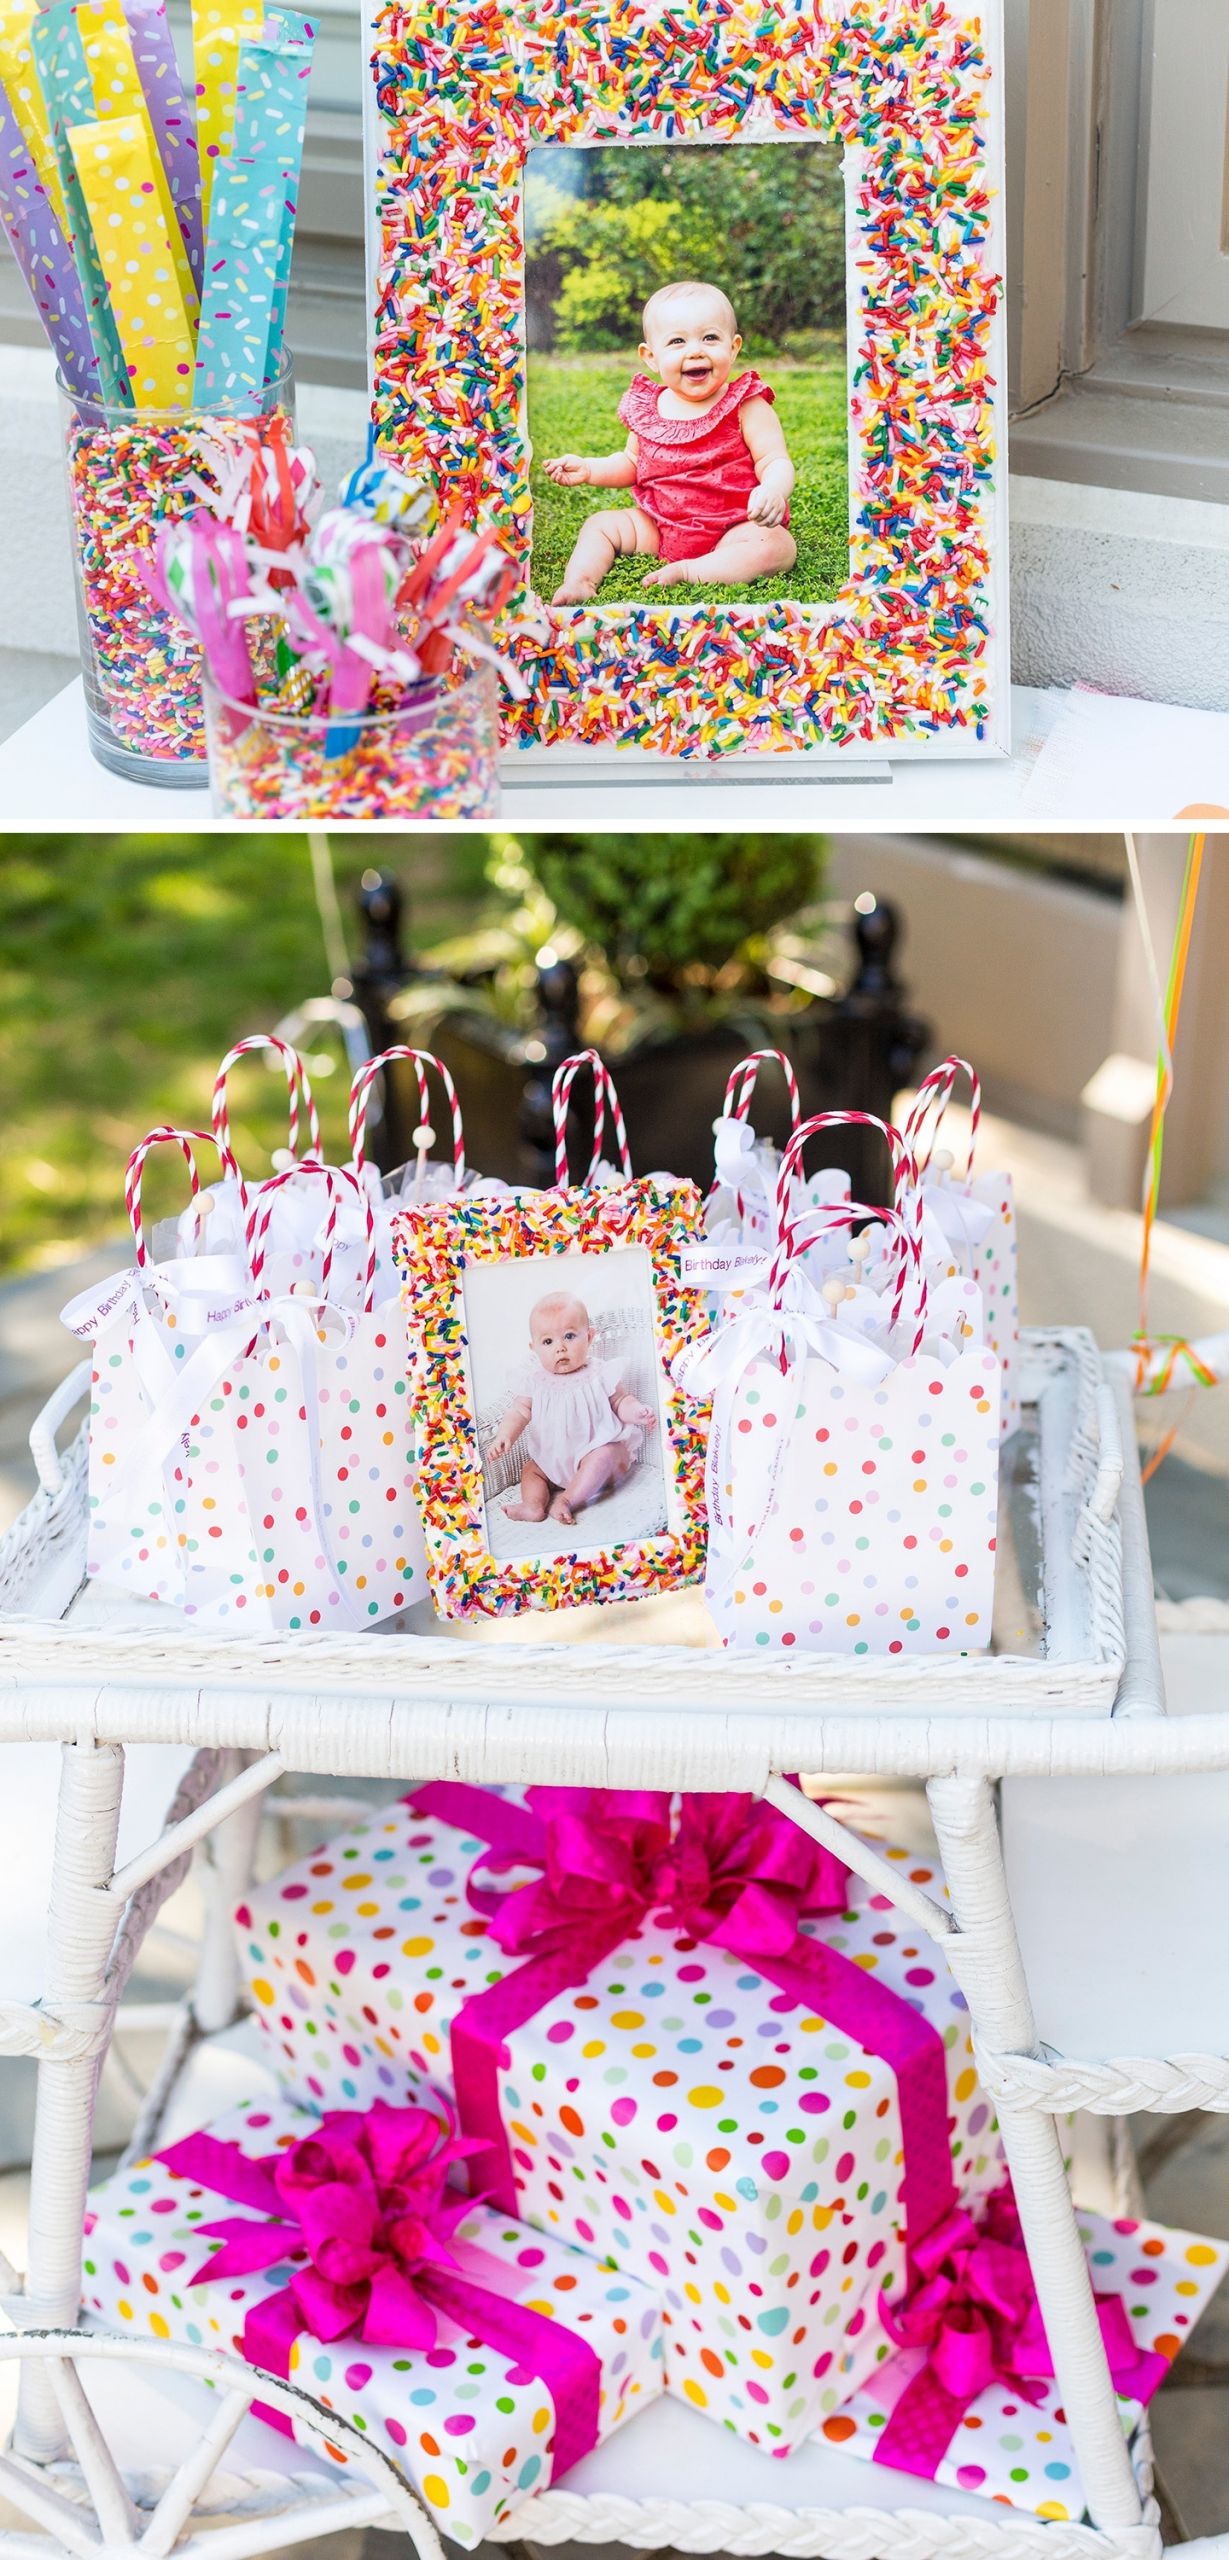 How To Decorate For A Birthday Party
 Hooray For A Sprinkle Party